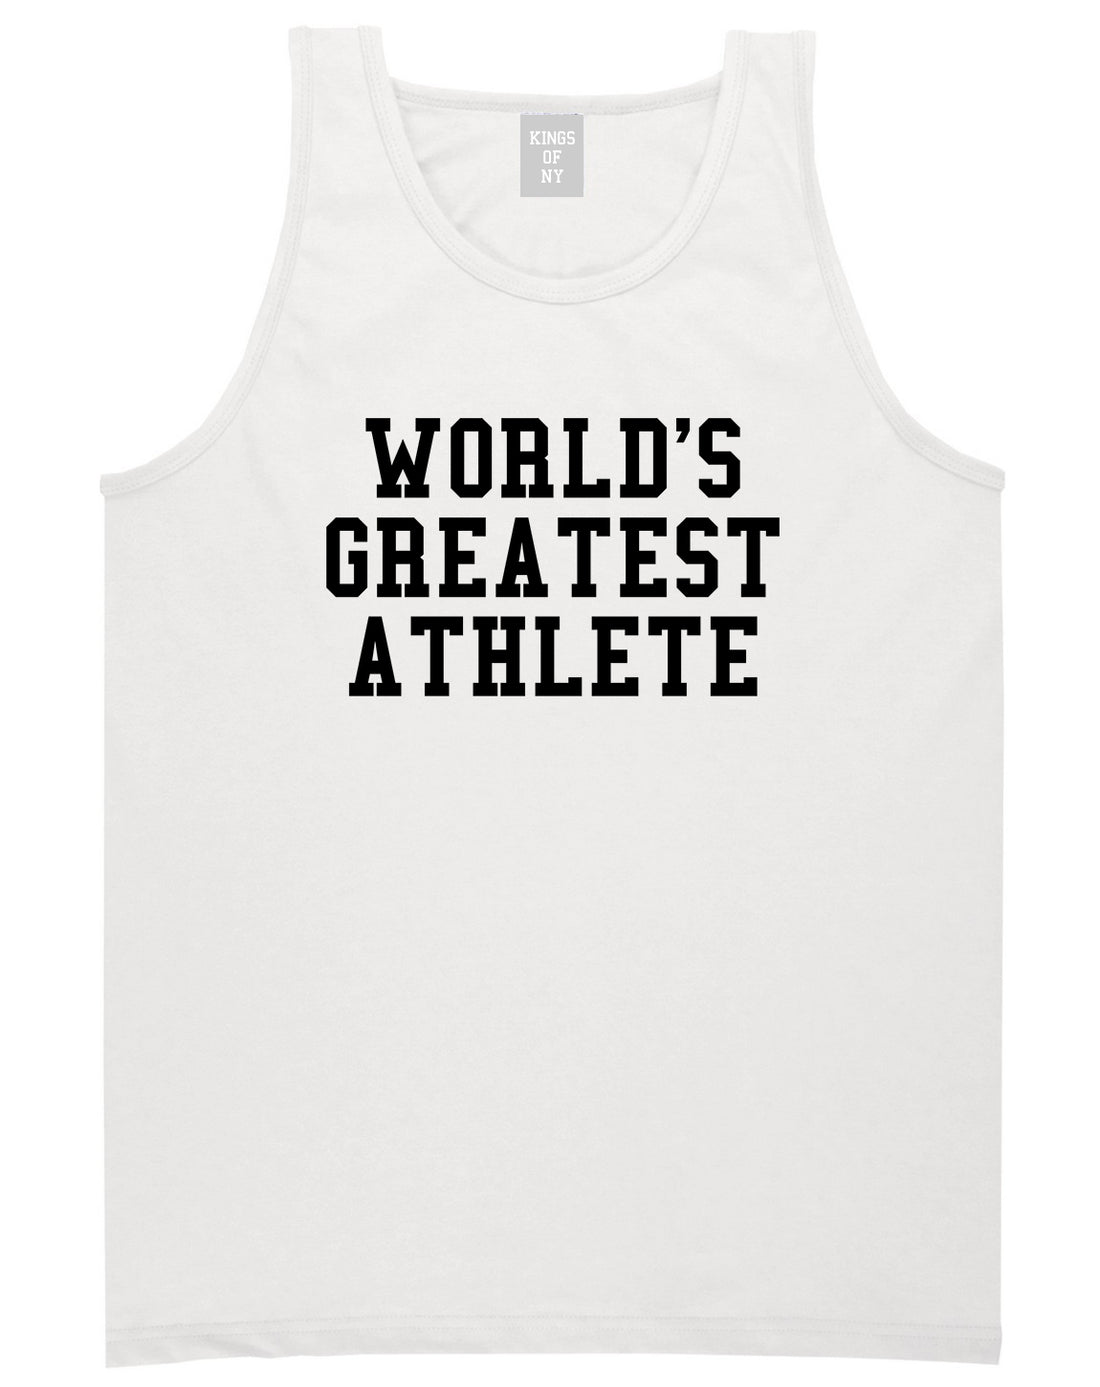 Worlds Greatest Athlete Funny Sports Mens Tank Top T-Shirt White